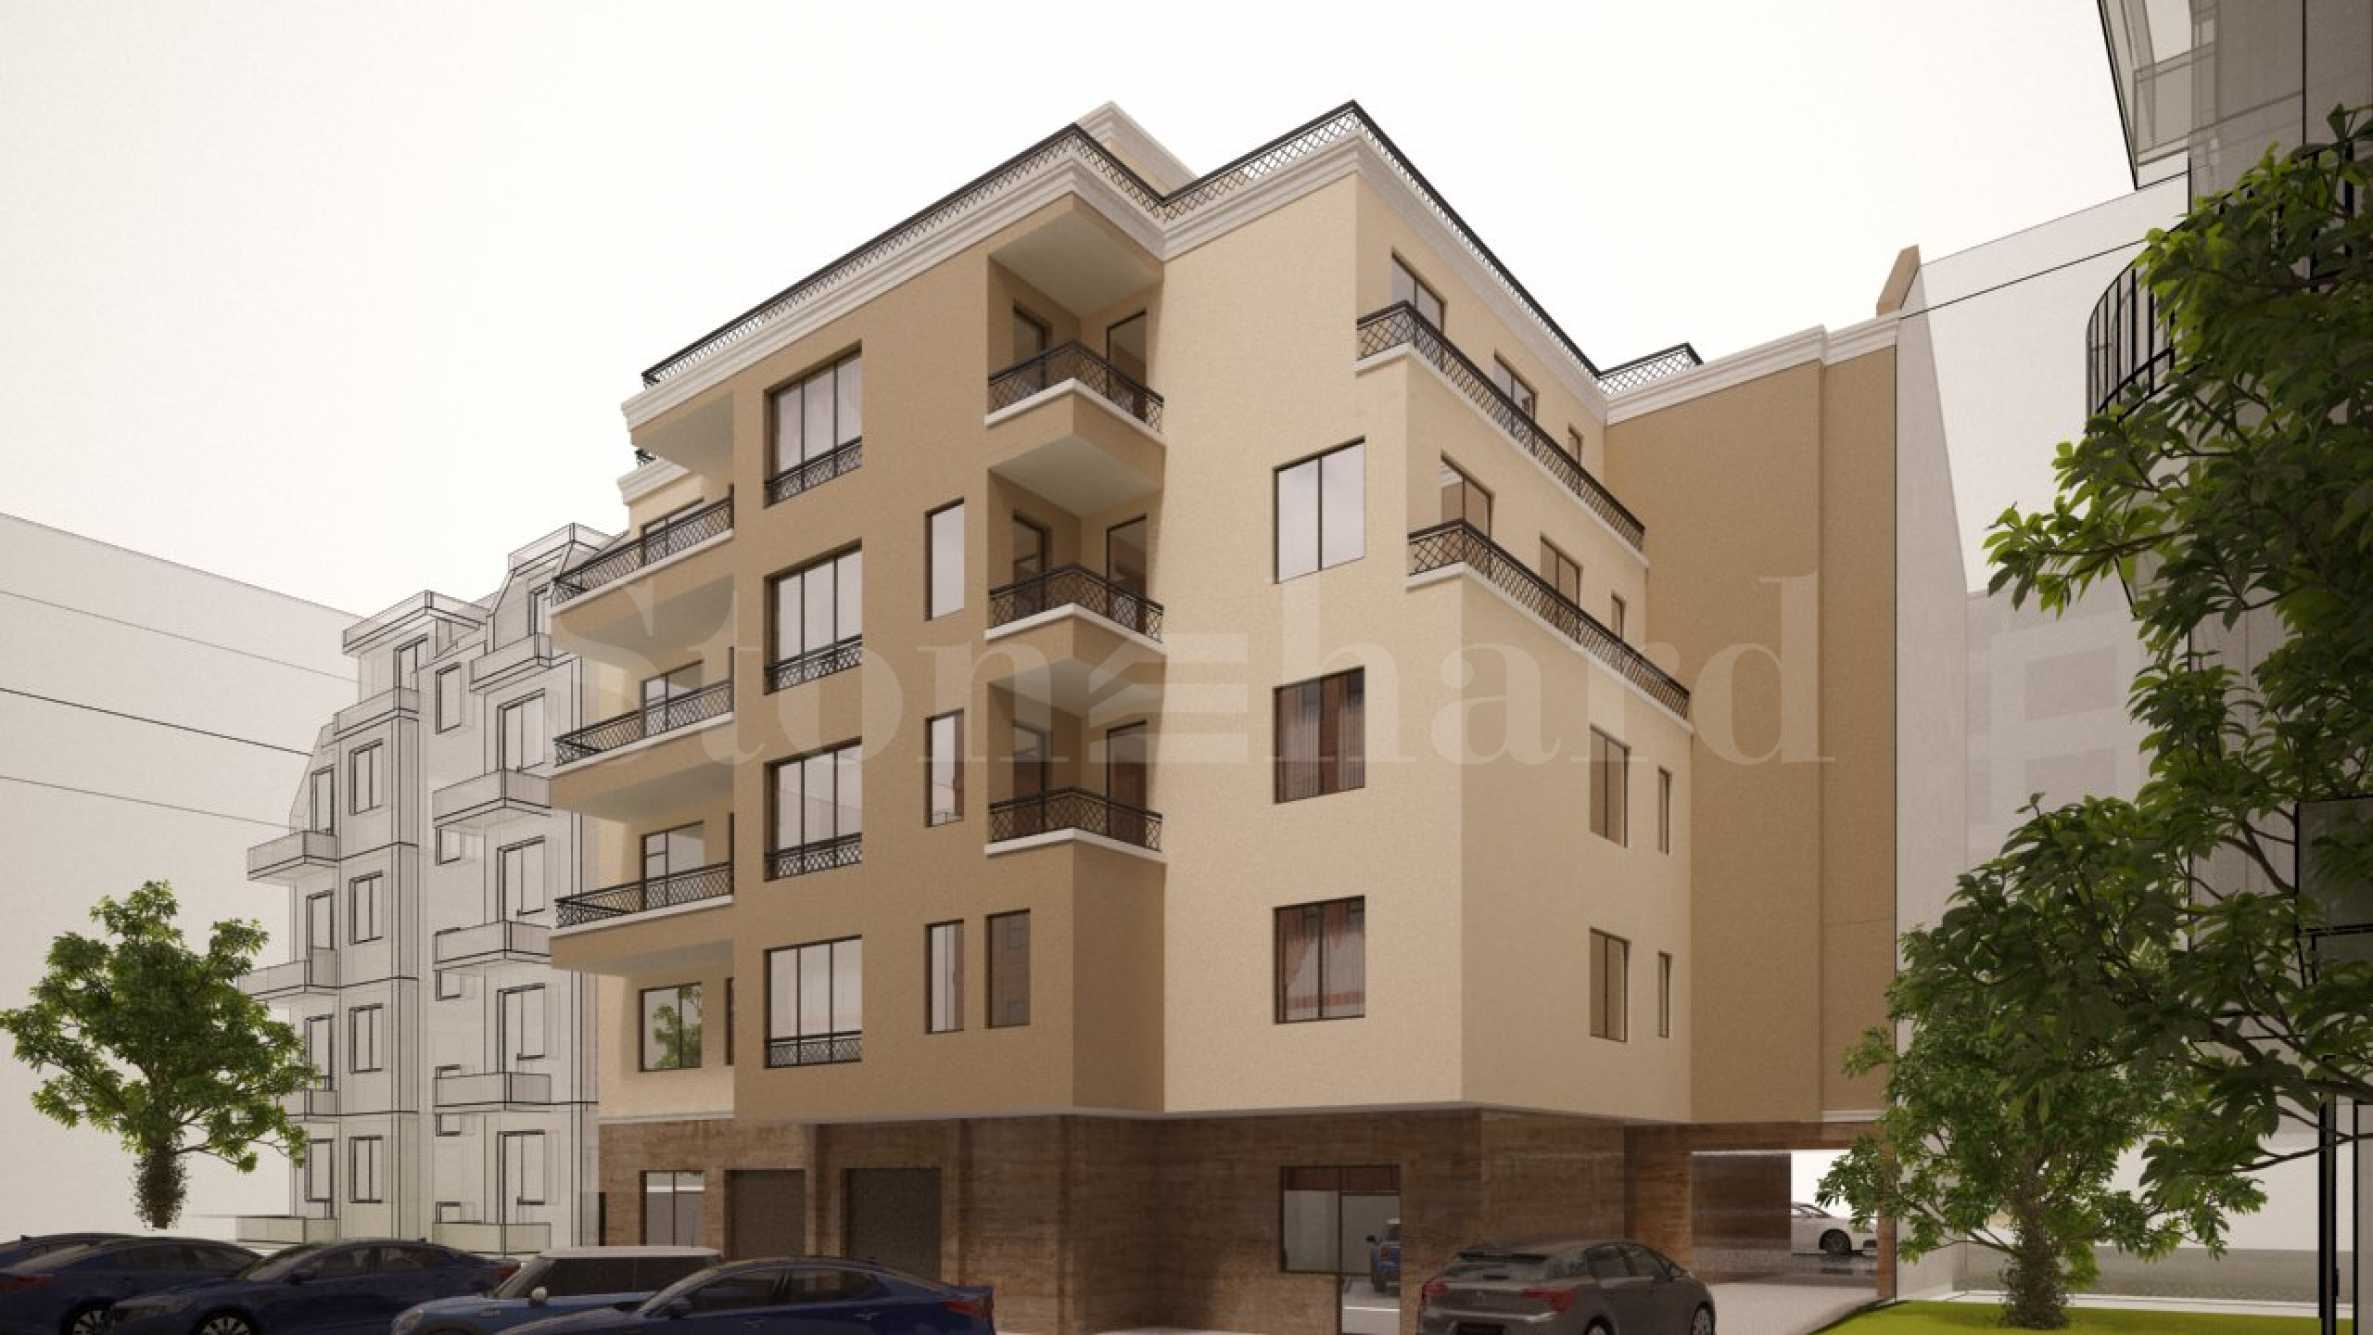 1-Bedroom apartments in a new 5-storey building near the park in Burgas 2 - Stonehard